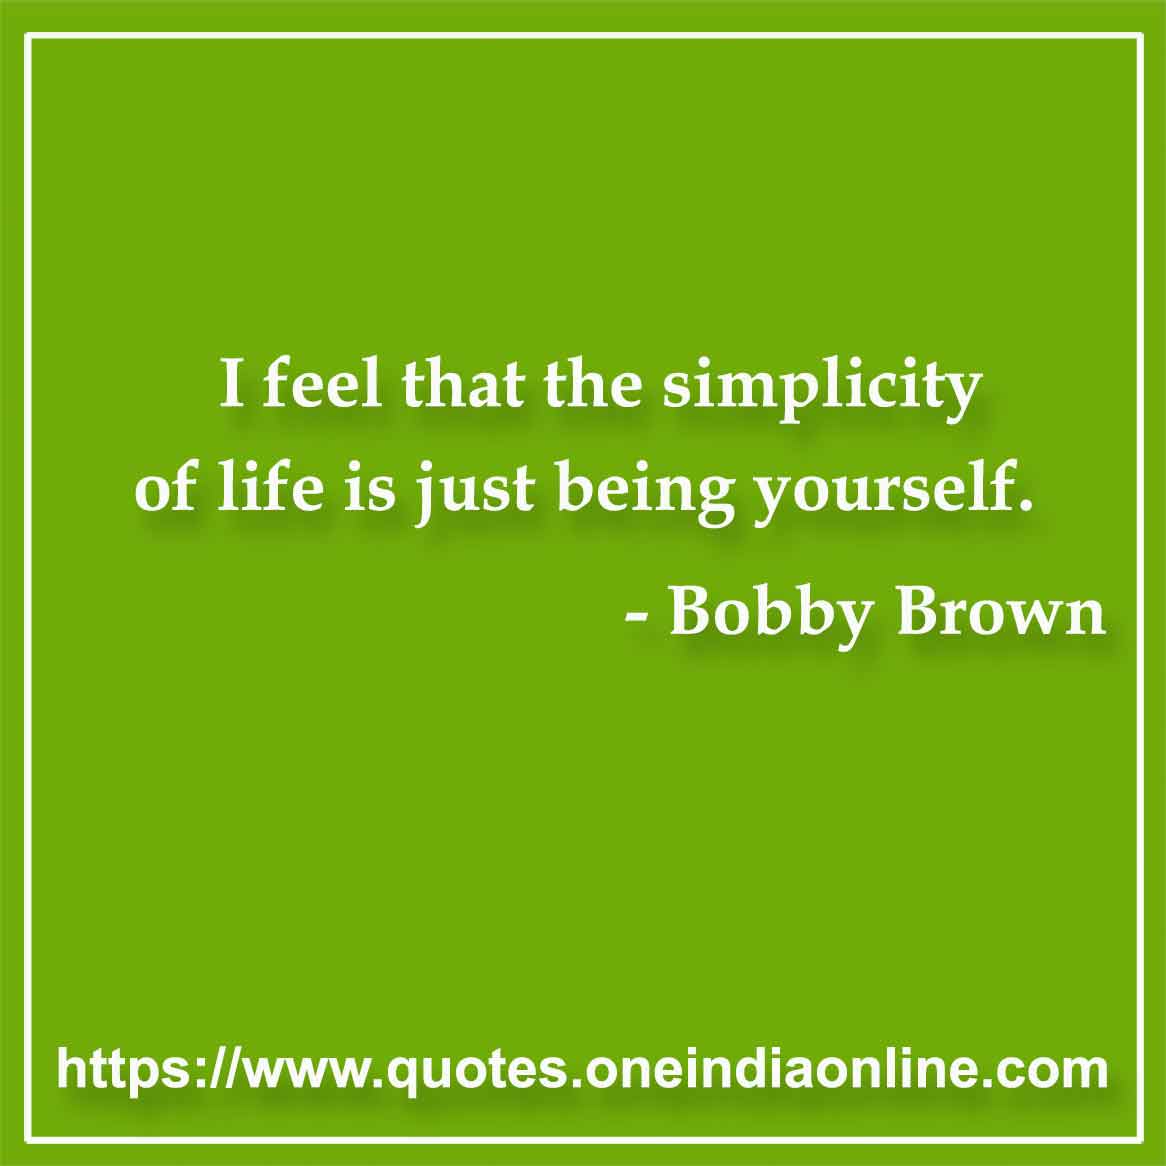 I feel that the simplicity of life is just being yourself.

- Bobby Brown